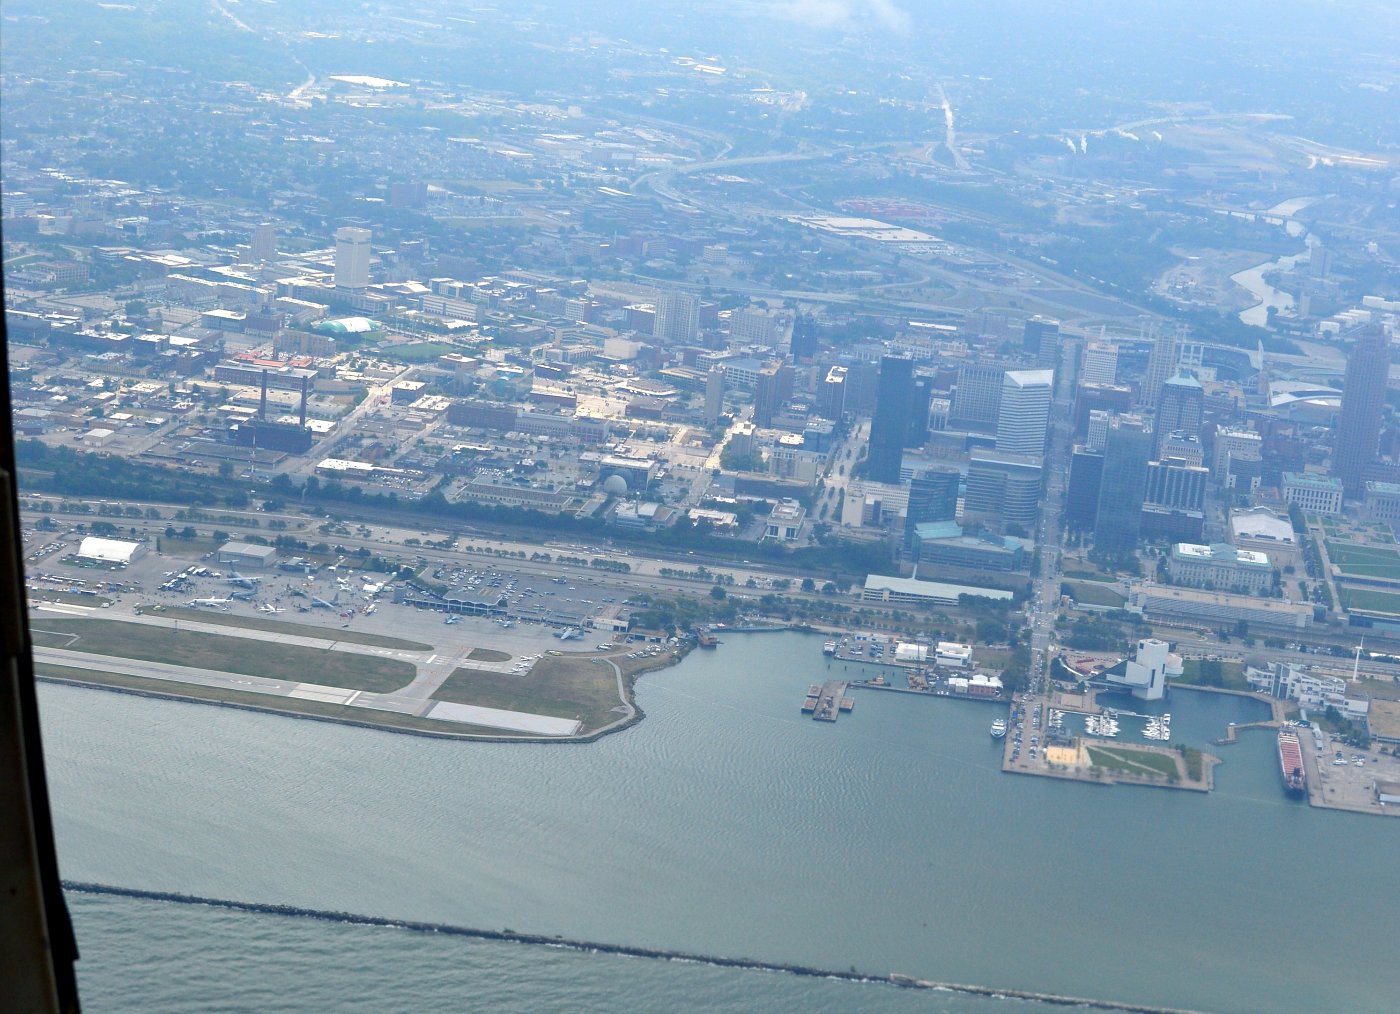 Burke Lakefront airport.  Home of the Cleveland National Air Show.